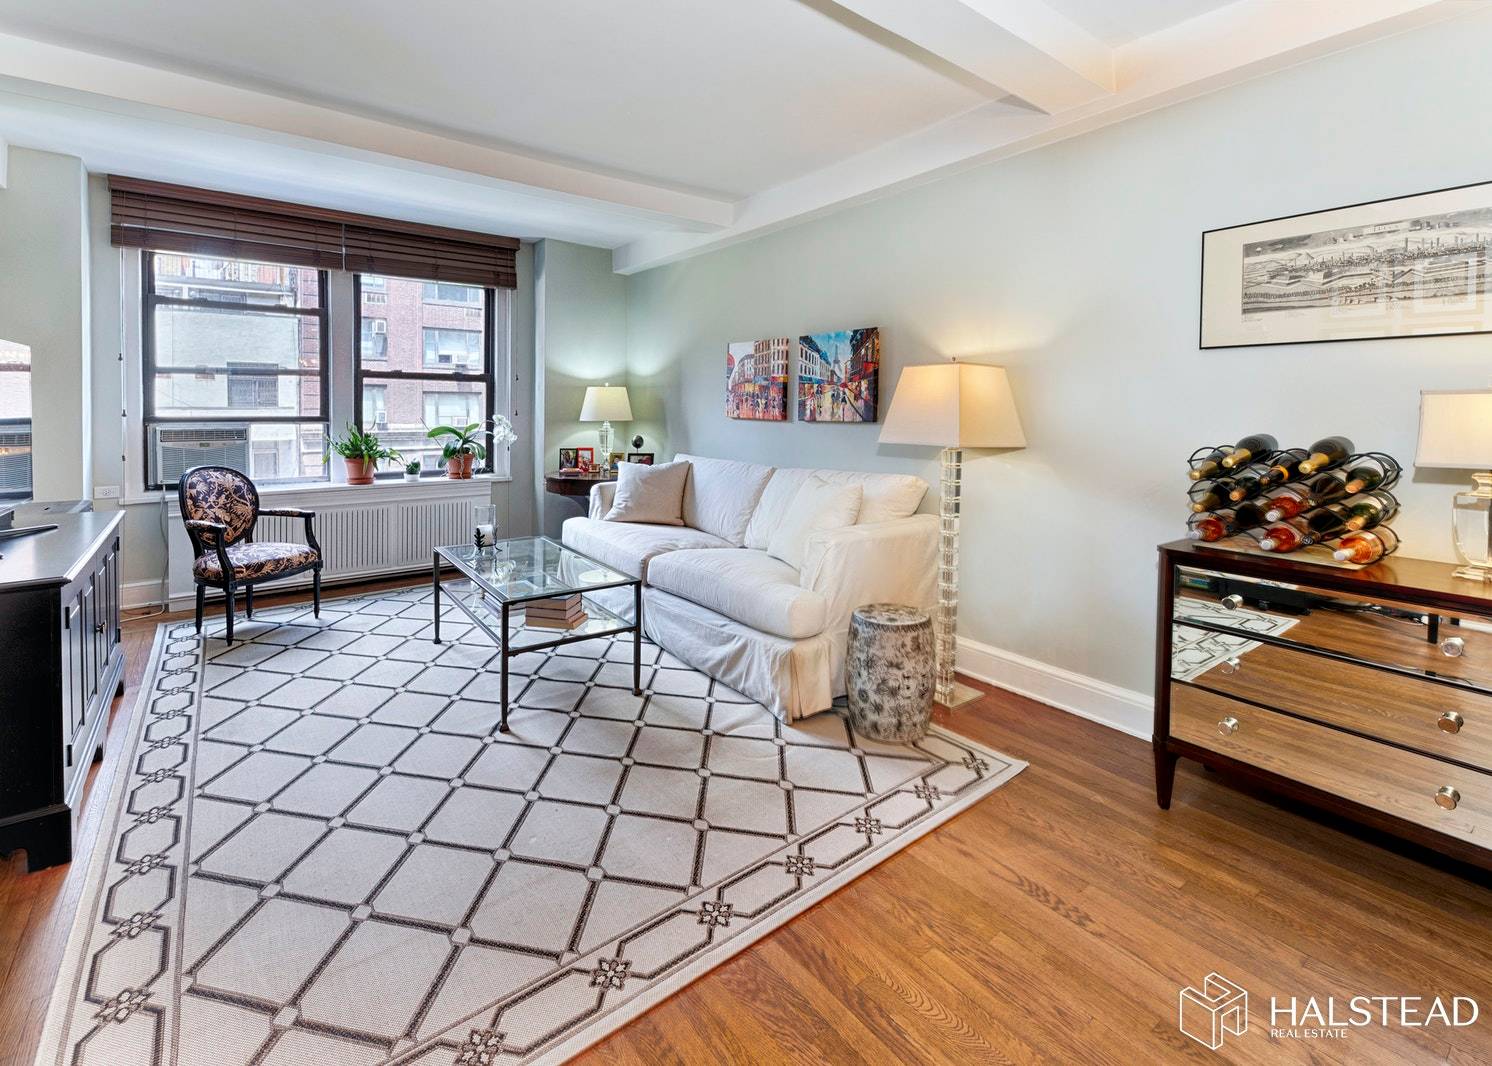 Immaculately move in ready sun filled one bedroom in fabulous 205 E 78th Street full service coop.